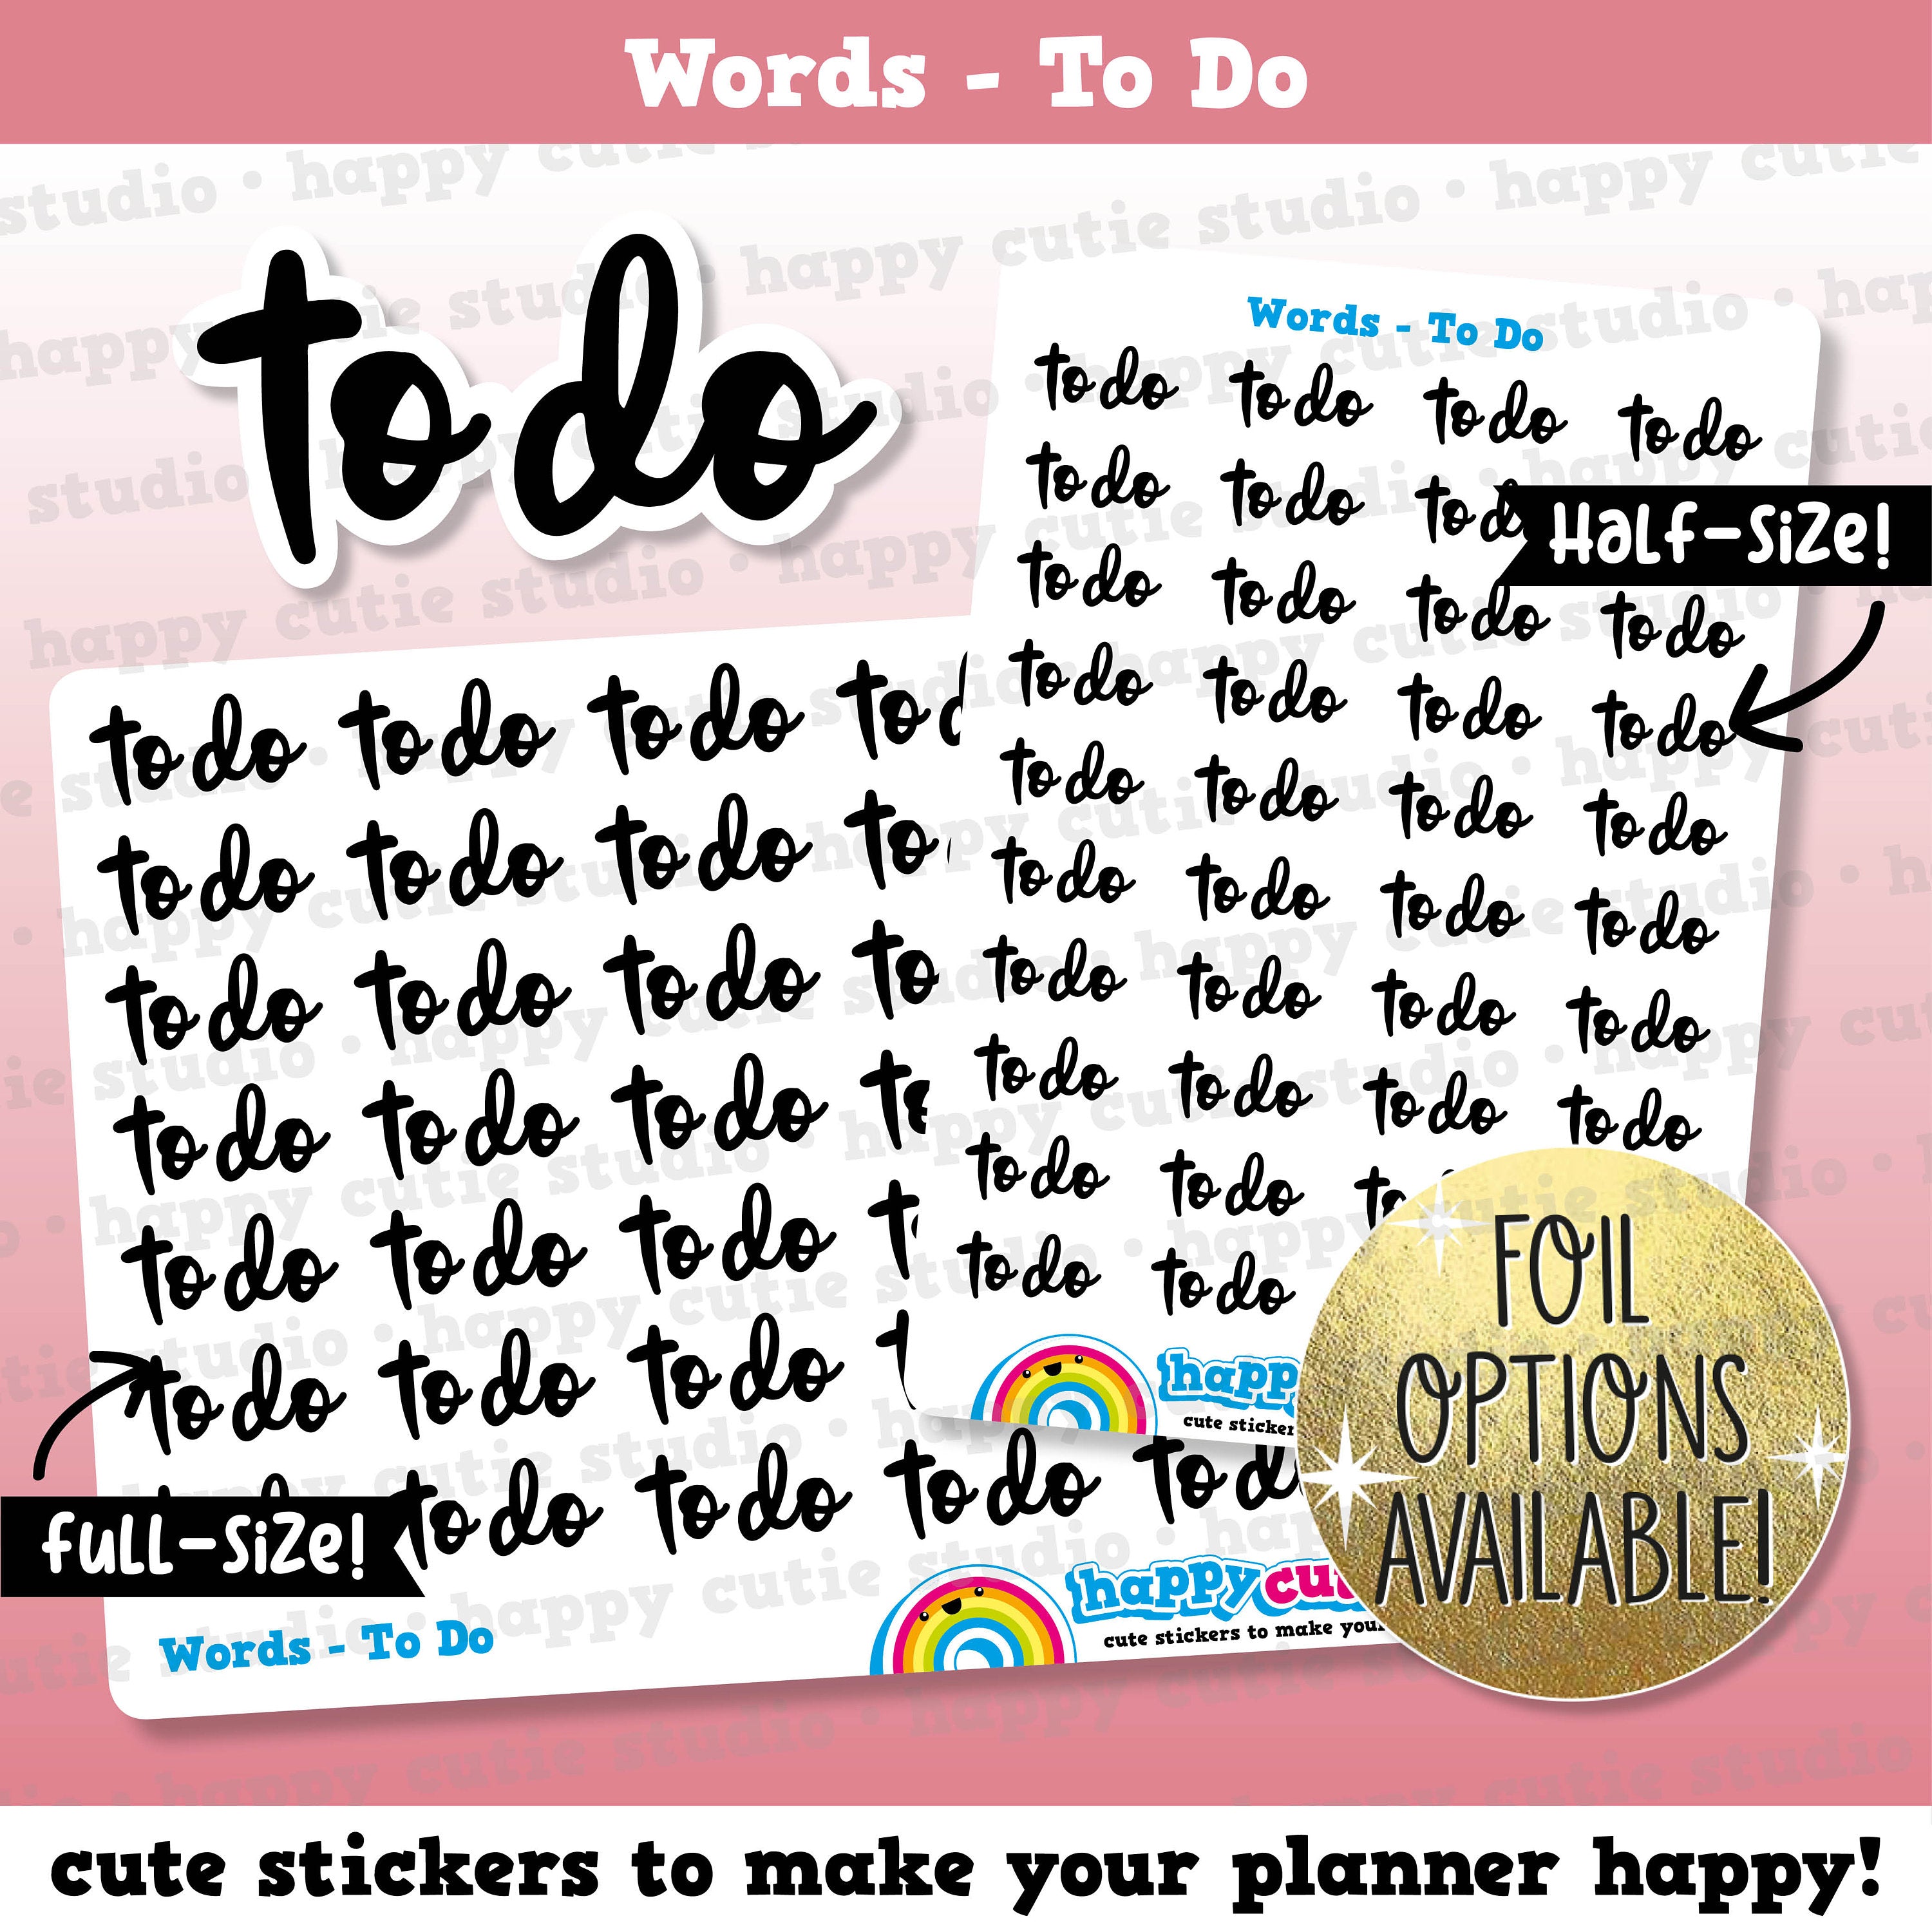 To Do Words/Functional/Foil Planner Stickers